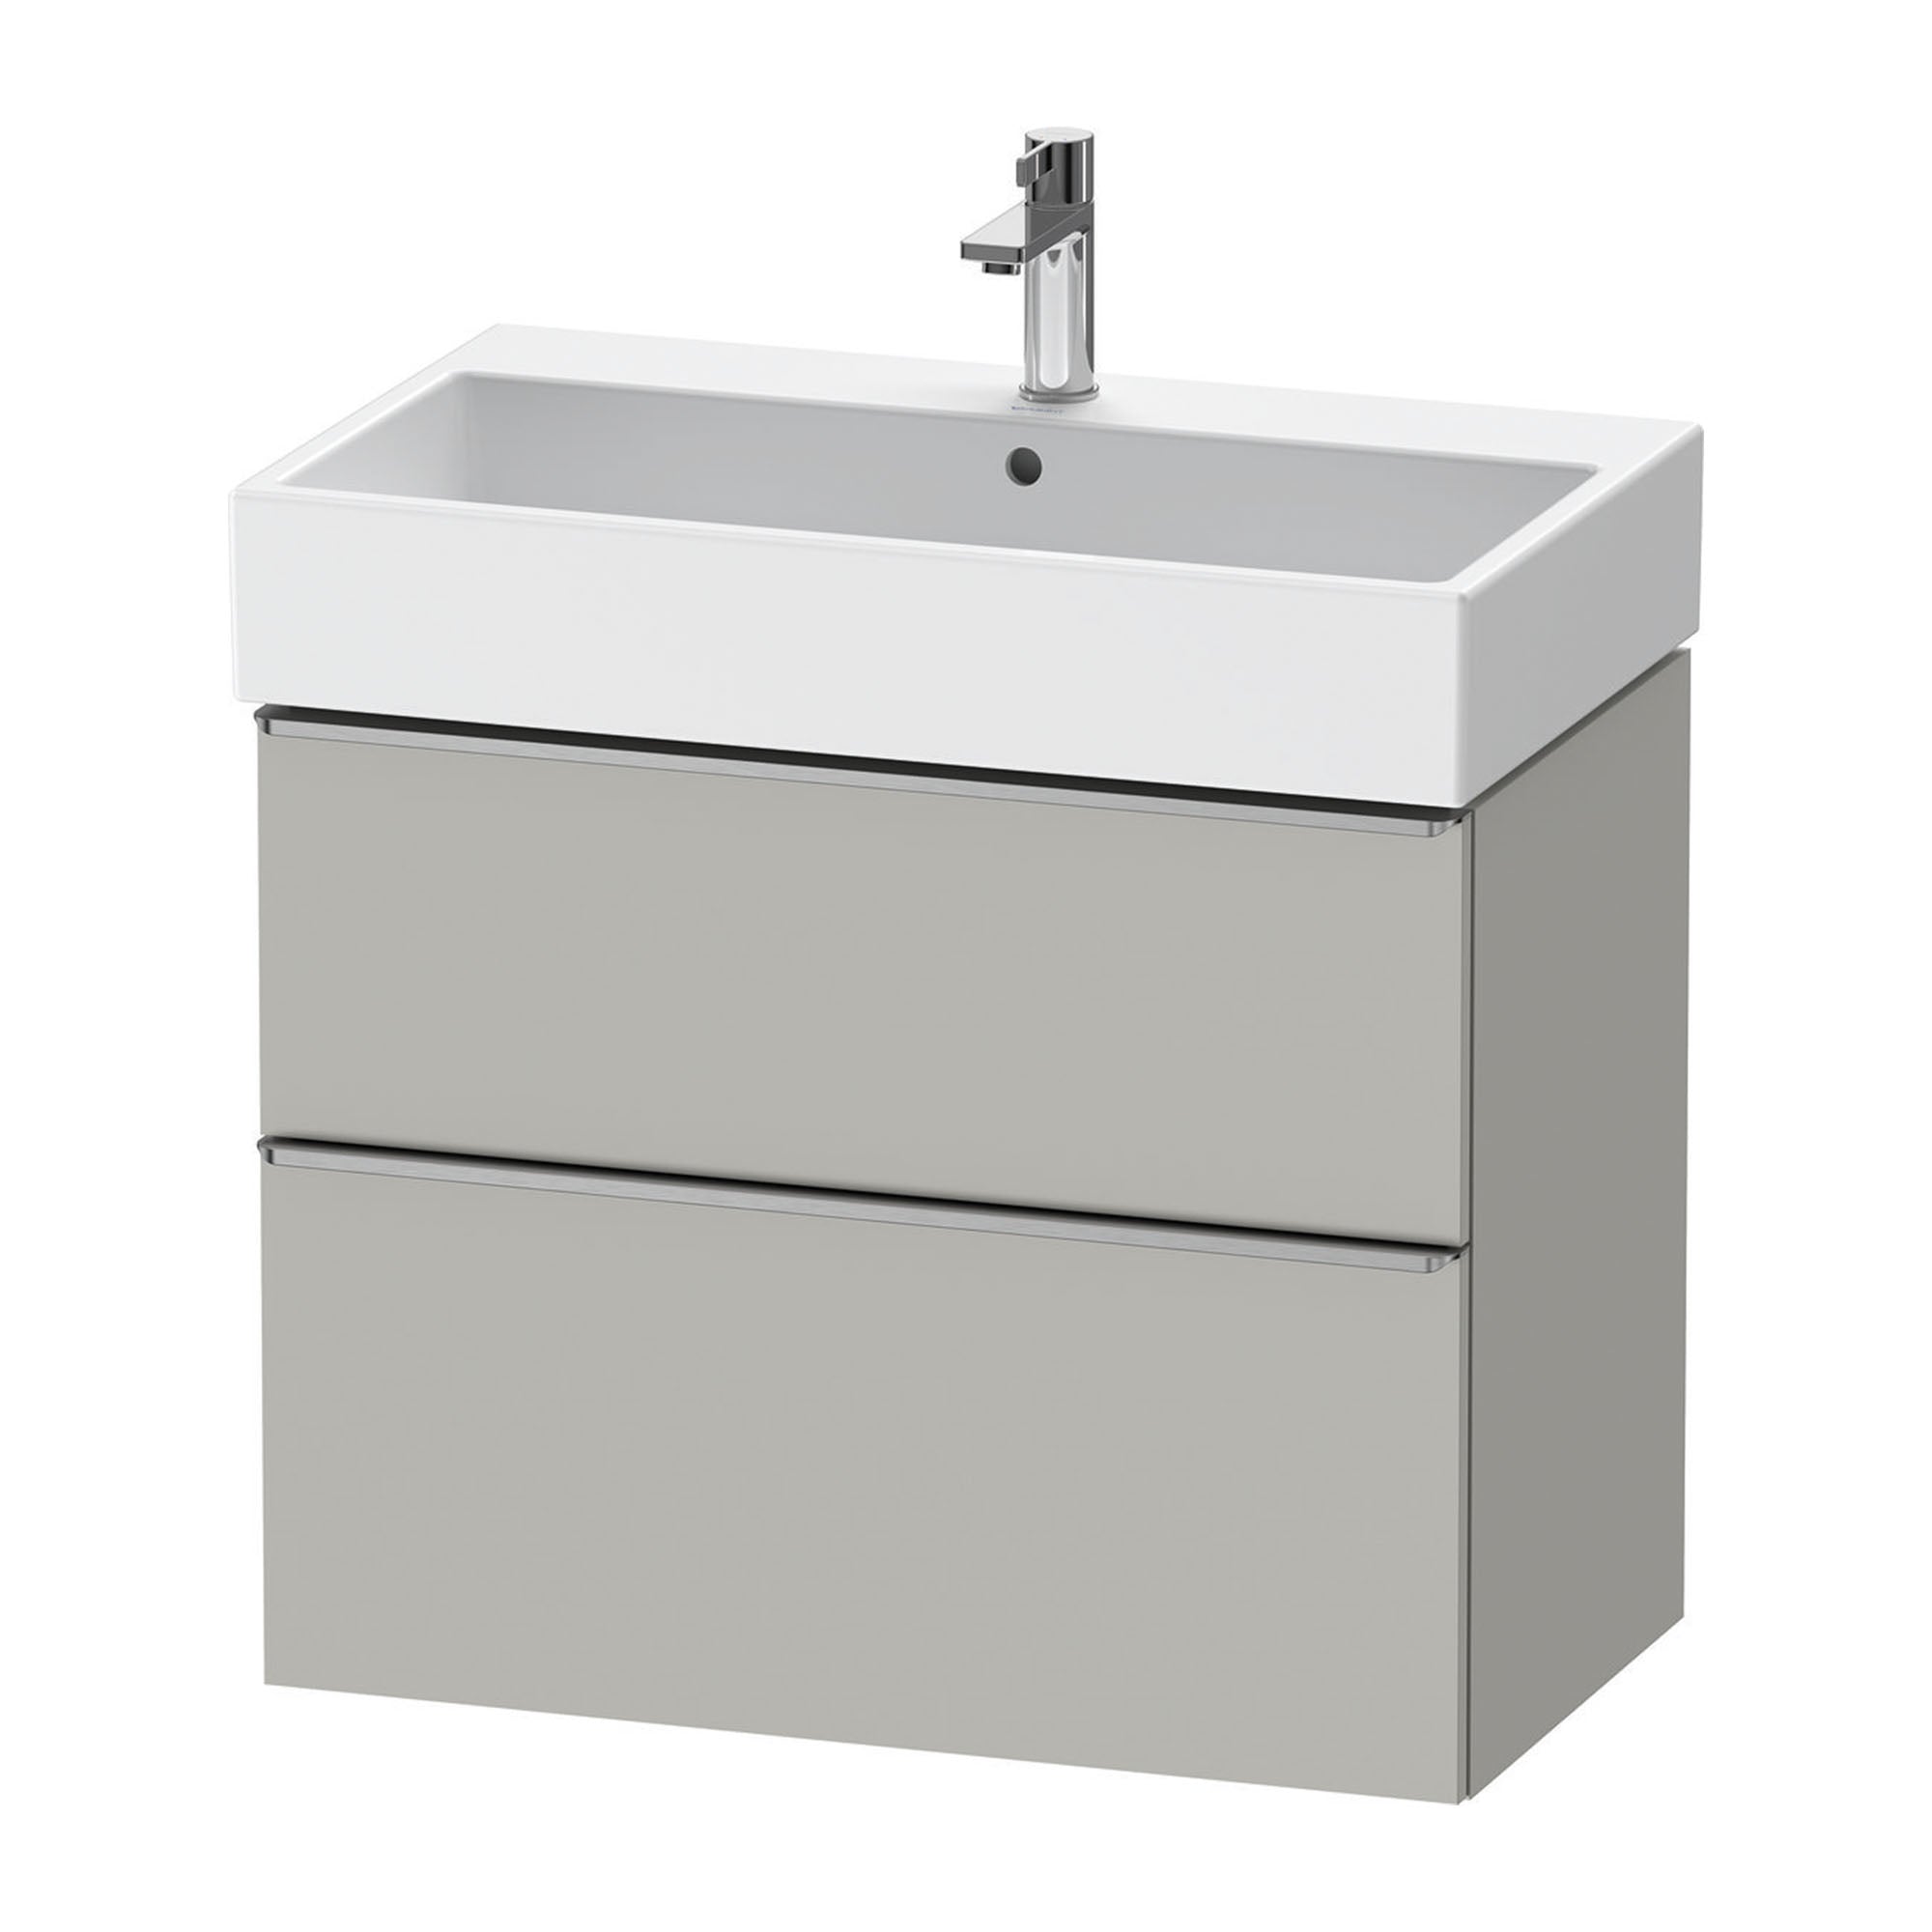 duravit d-neo 800 wall mounted vanity-unit with vero basin concrete grey stainless steel handles